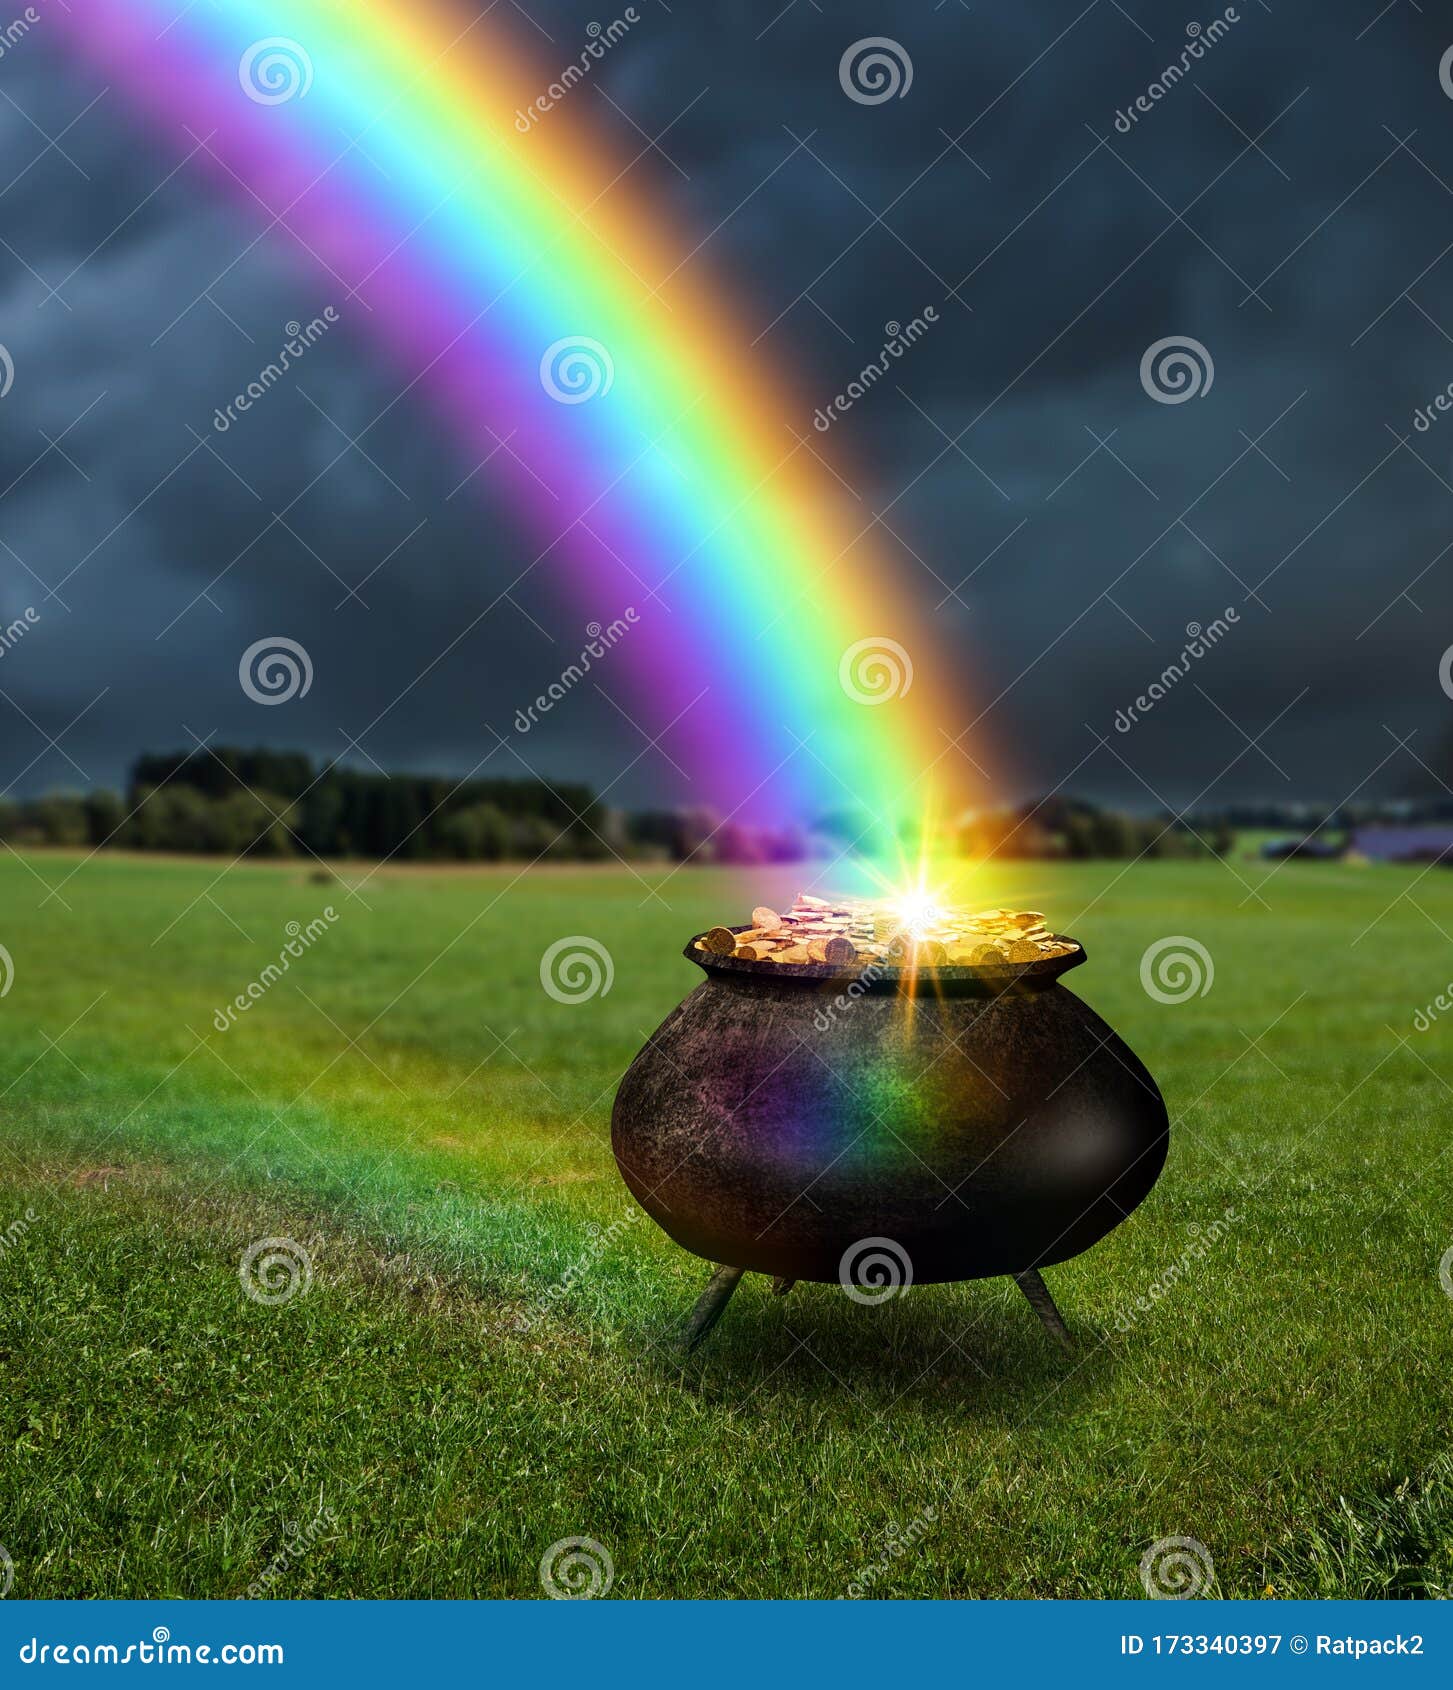 magical pot of gold at the end of a rainbow